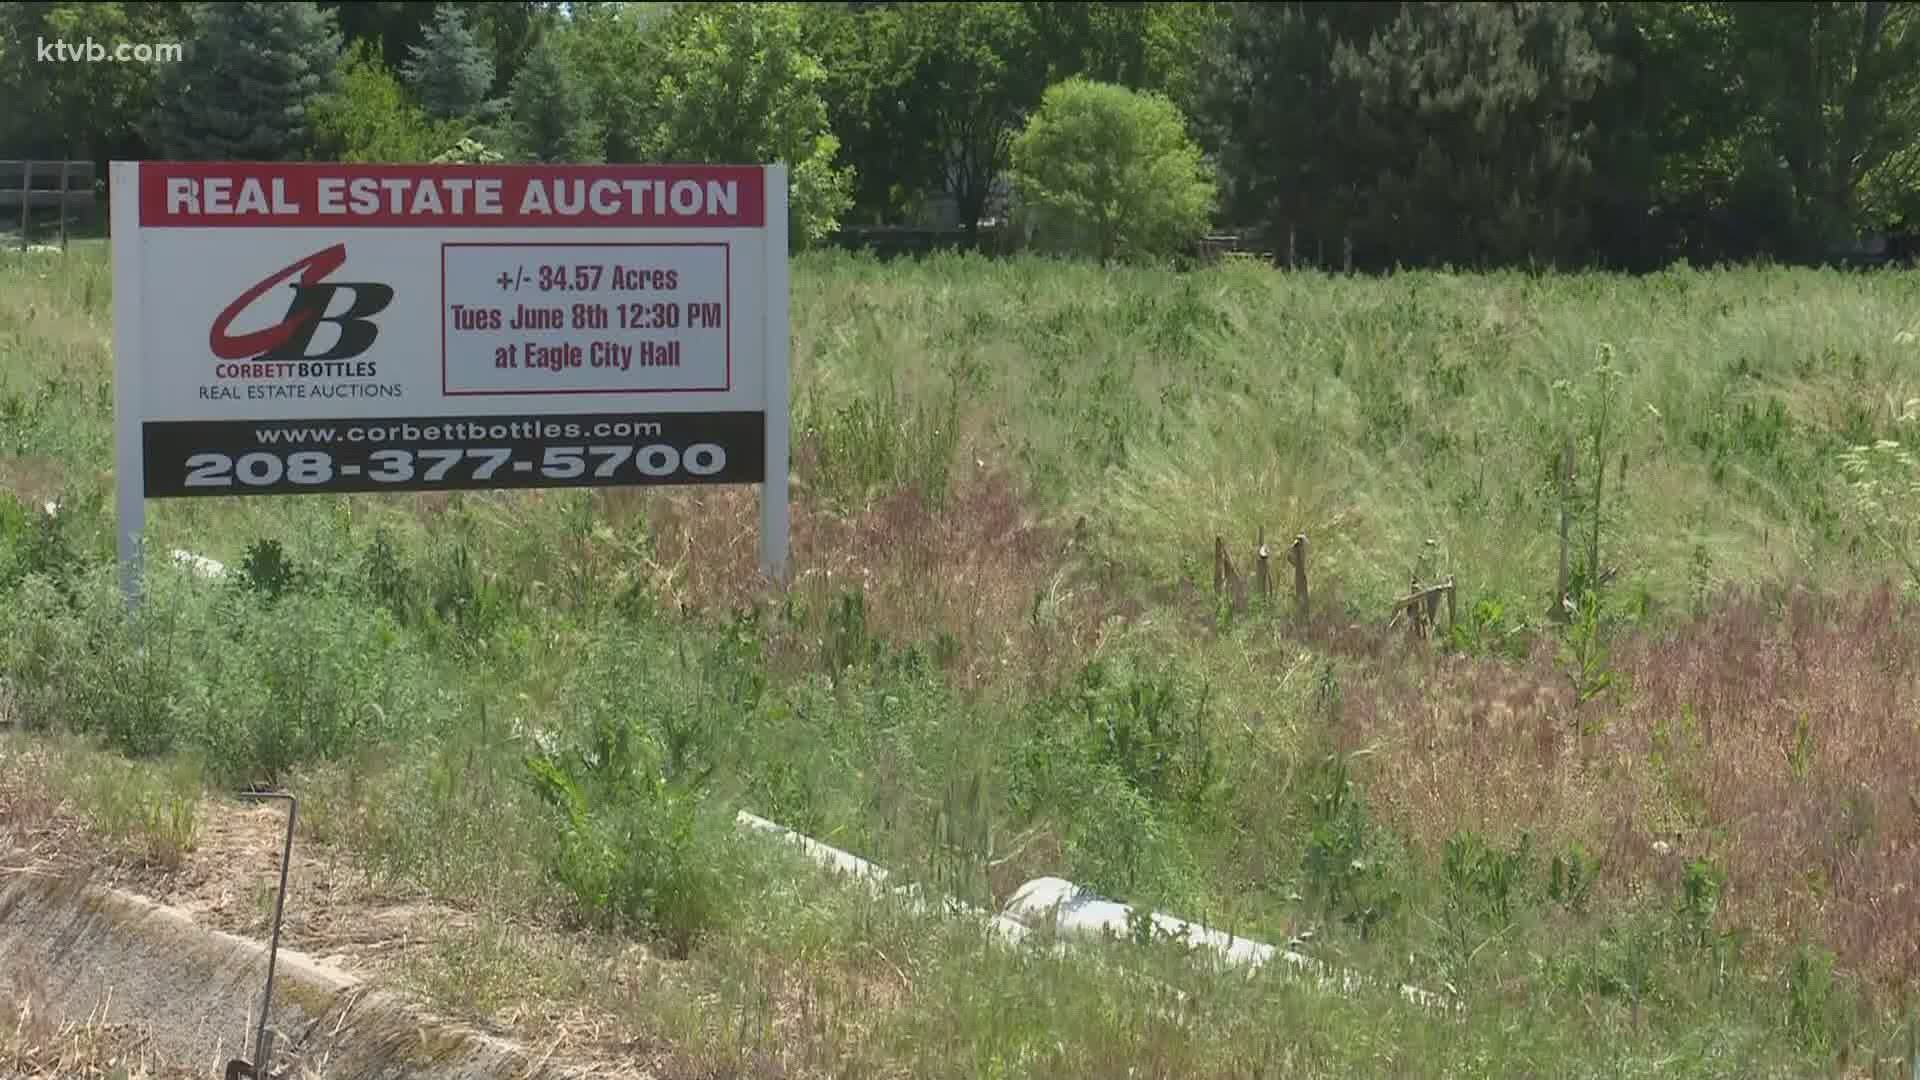 The 34-acre parcel will likely be turned into homes. That has some nearby residents upset.